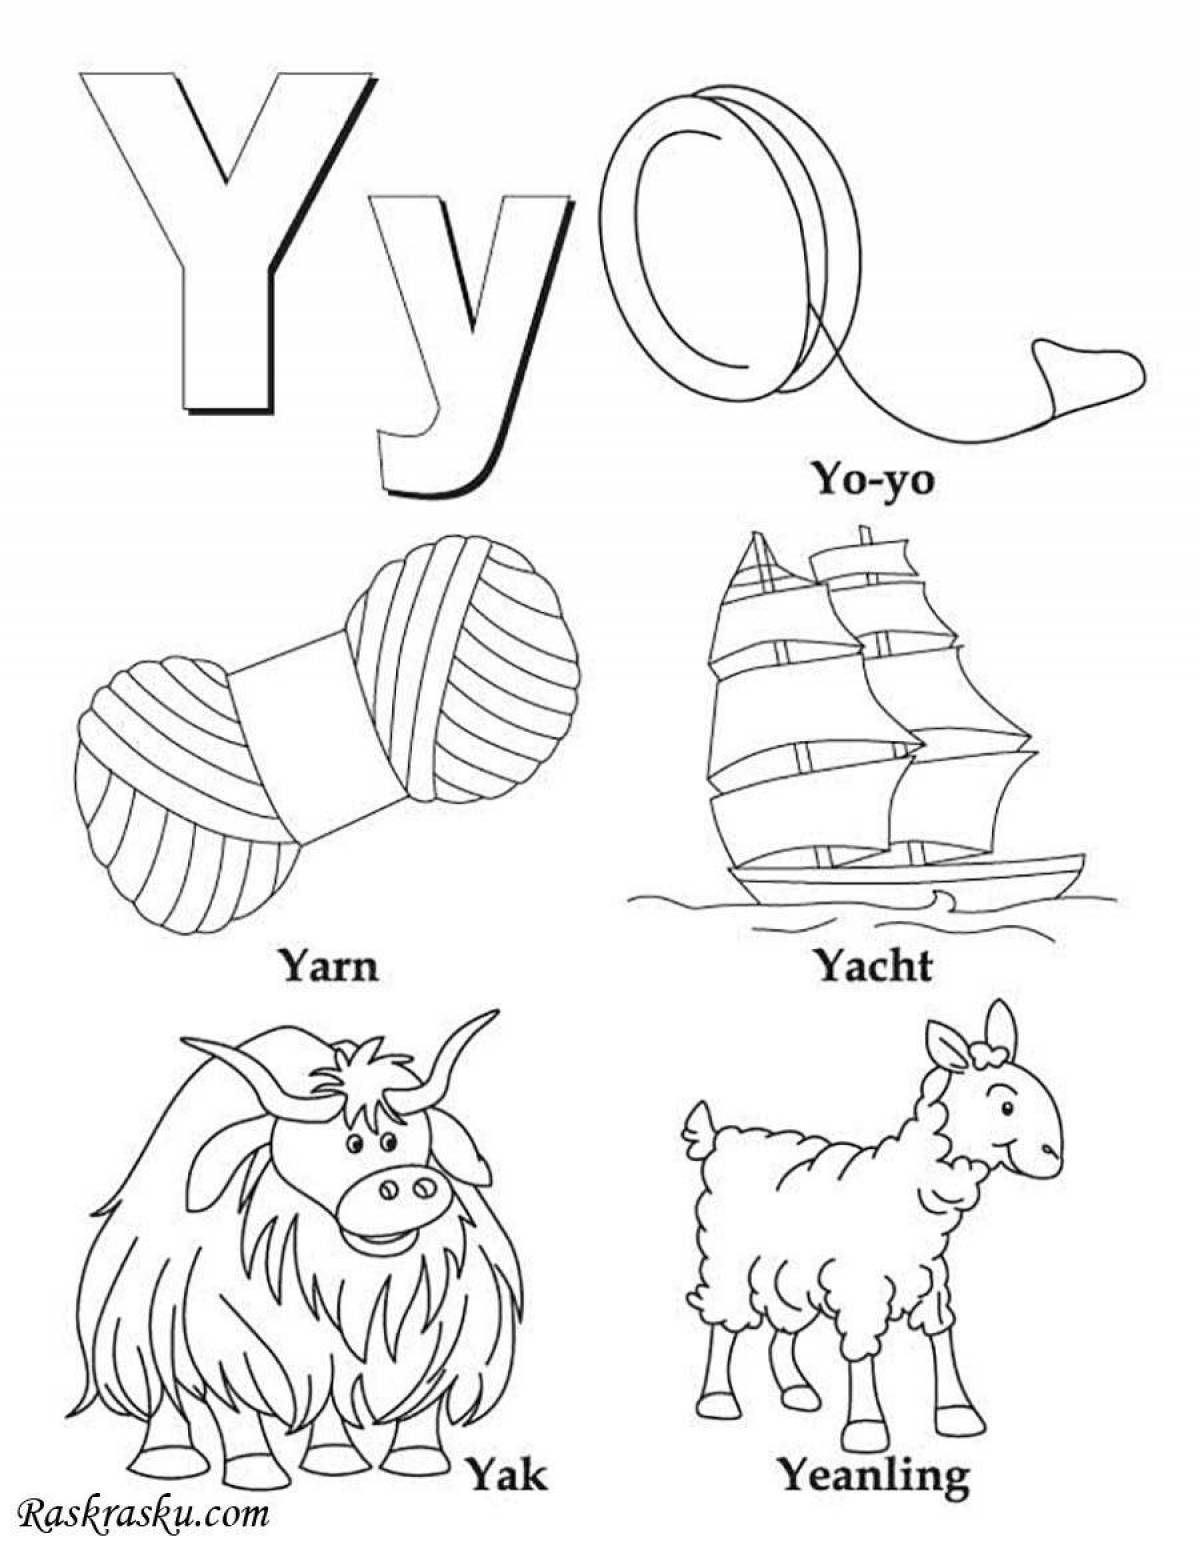 Colorful english alphabet coloring page for kids of all backgrounds